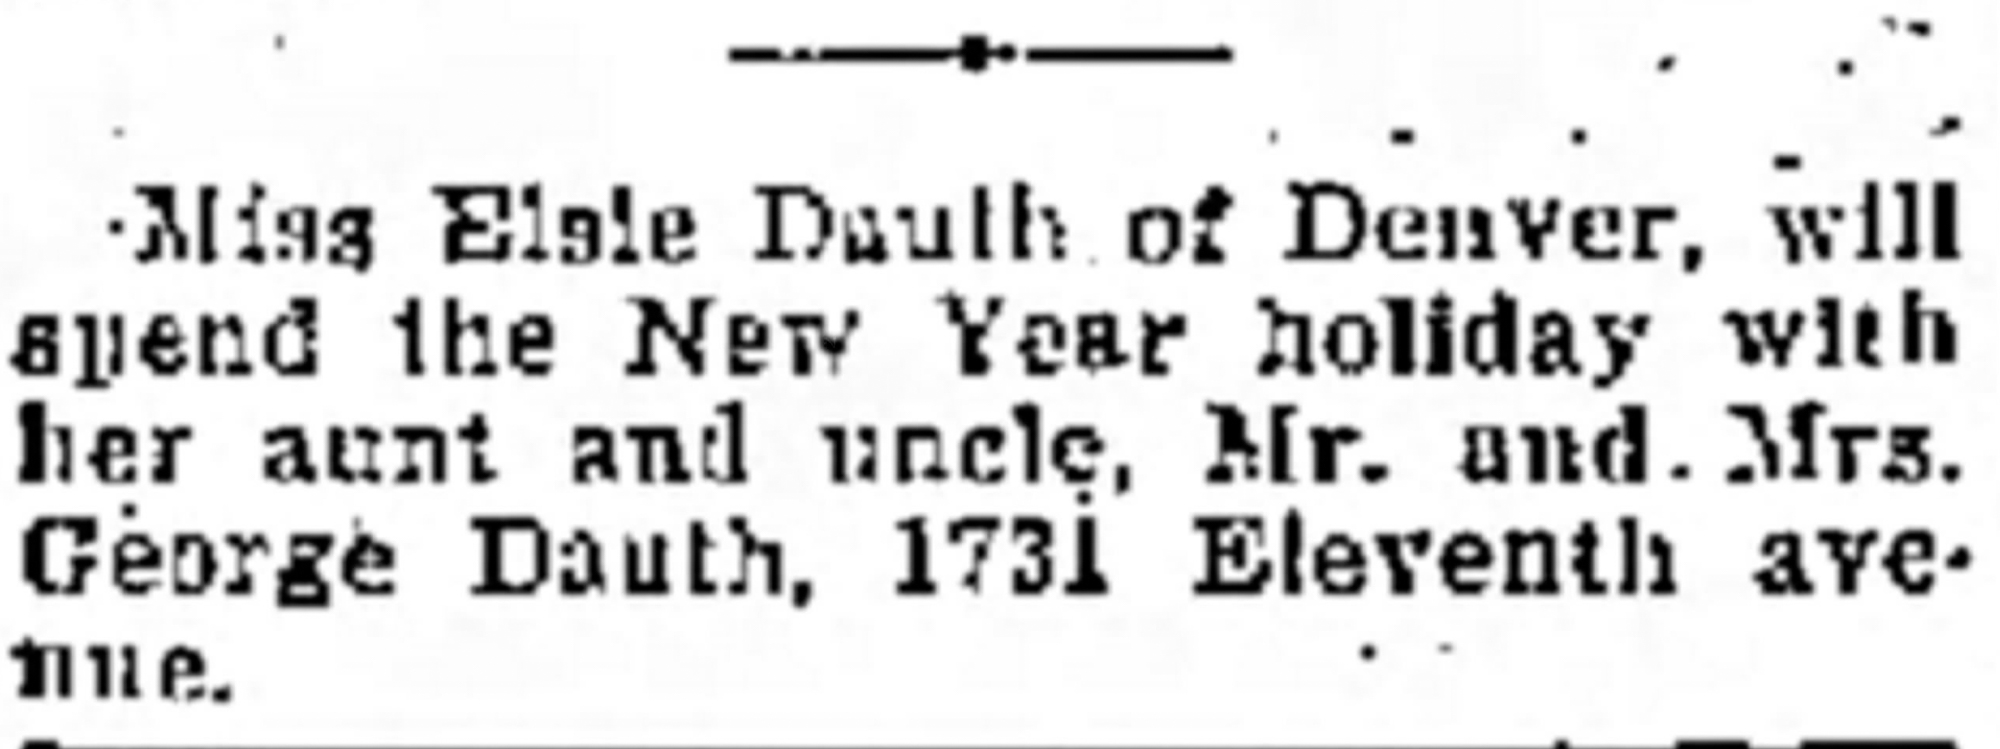 Dauth Family Archive - 1943-12-31 - Greeley Daily Tribune - Elsie Dauth Spends Christmas With George Dauth Family